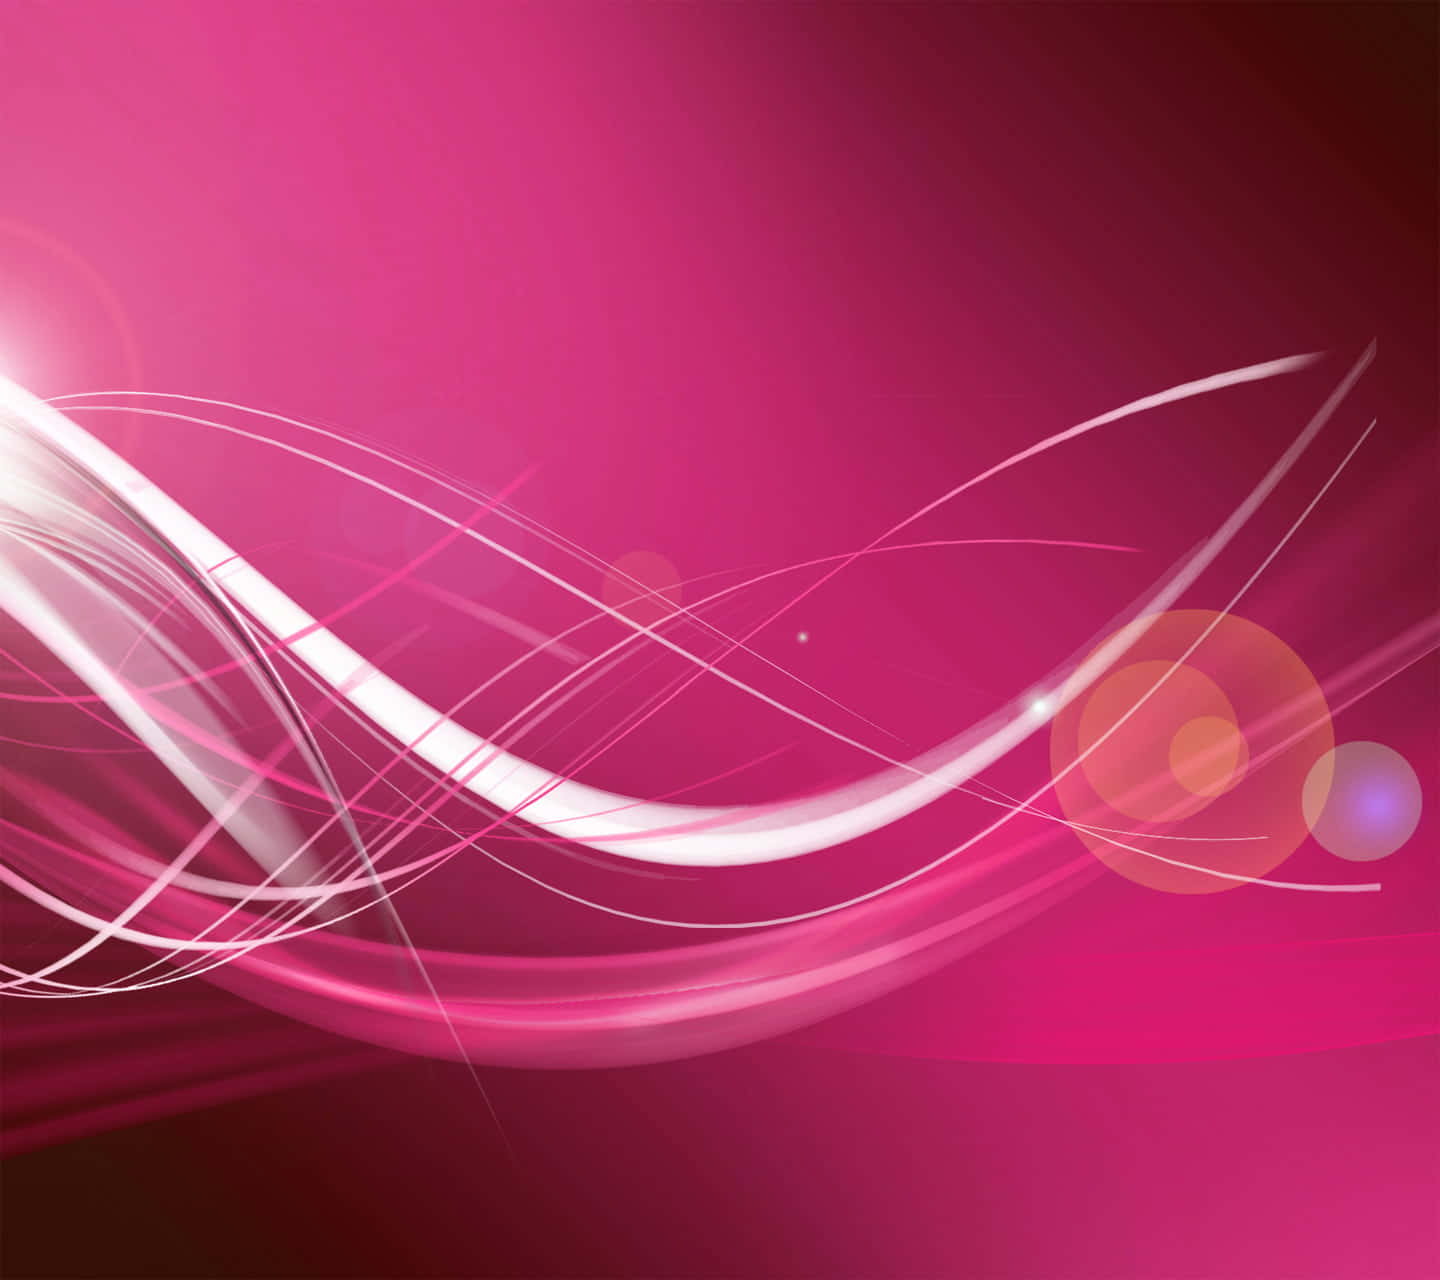 Form and color collide in this vibrant pink abstract background